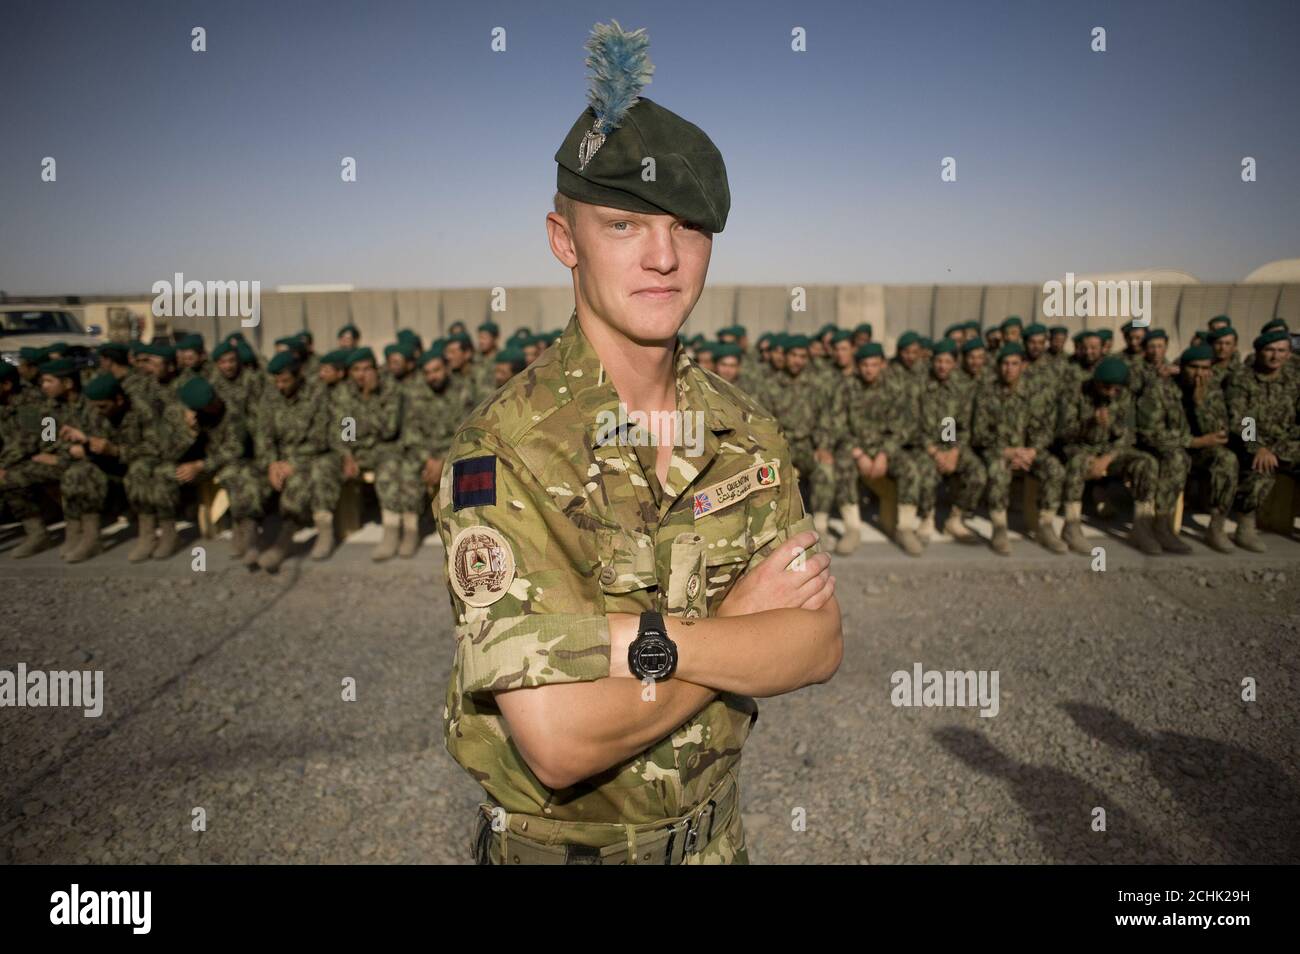 Lieutenant Pete Quentin, 27, serving with the London Regiment, a liaison officer working between the United States Marine Corps, the British Army and the Afghan National Army (ANA) during their training process stands in front of ANA soldiers prior to their graduation ceremony at Camp Leatherneck, next to the British base, Camp Bastion in Helmand Province, Afghanistan. PRESS ASSOCIATION Photo. Issue date: Thursday June 17, 2010. Camp Leatherneck is the base for 1 Marine Expeditionary Force, United States Marine Corps who lead the training of ANA soldiers. Photo credit should read: Sergeant Stock Photo